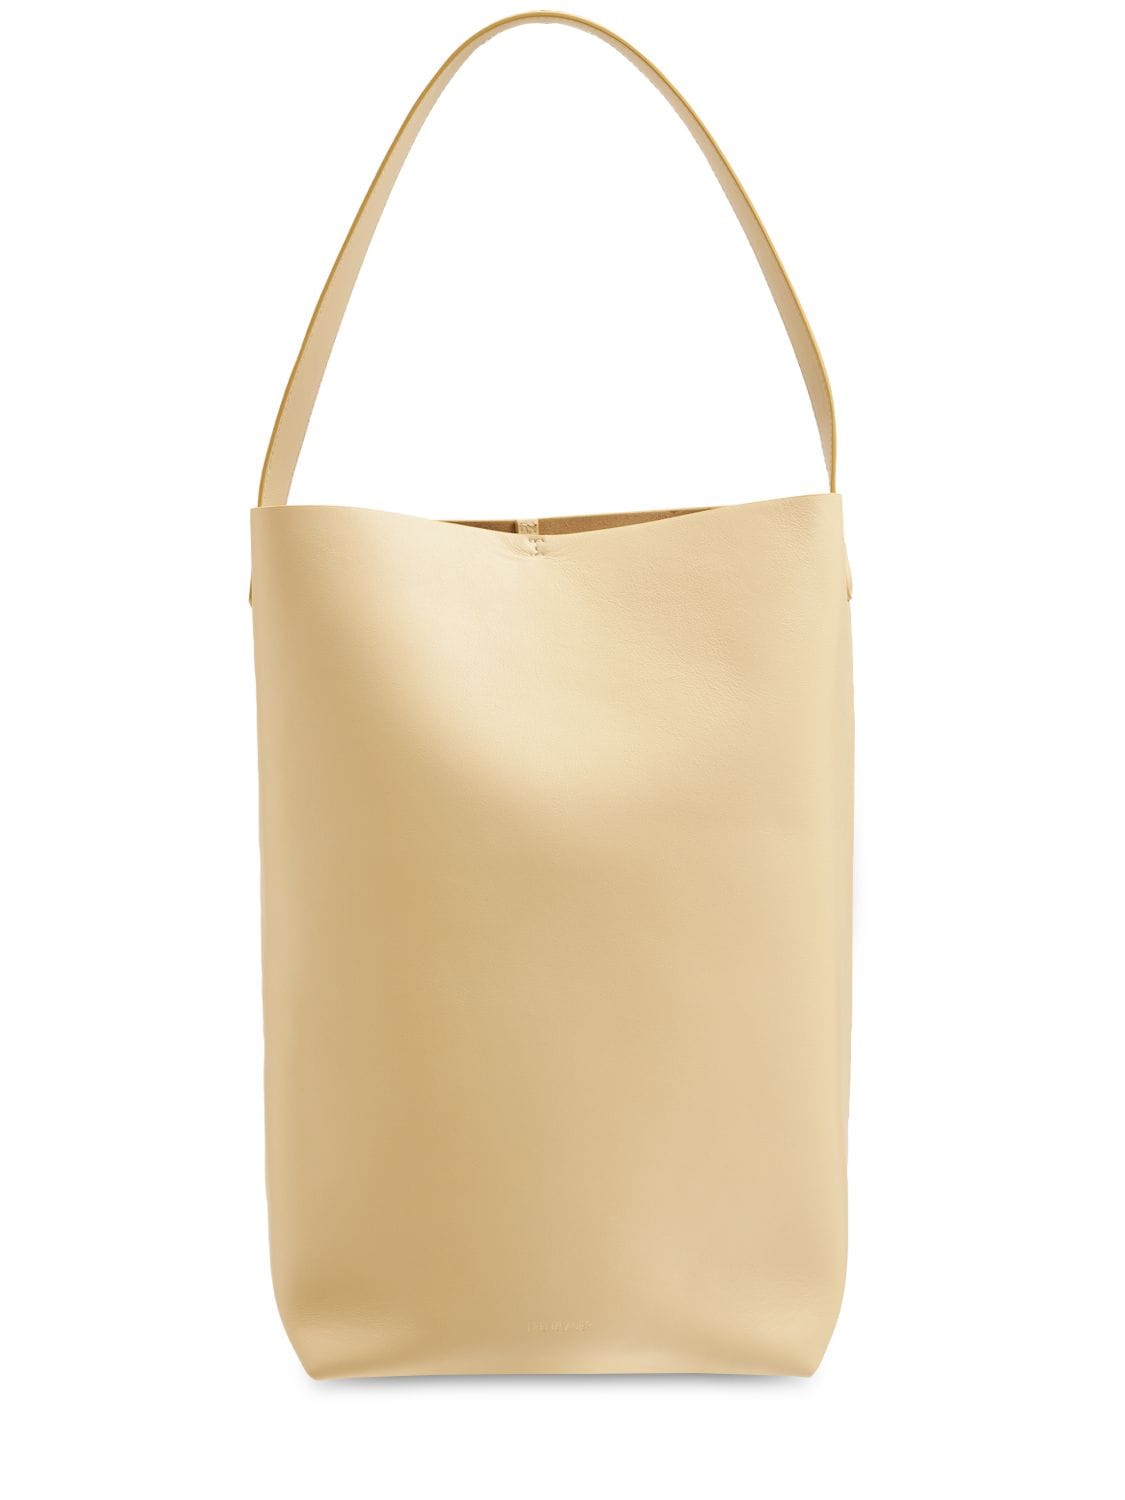 FRENZLAUER Mami Smooth Leather Tote Bag